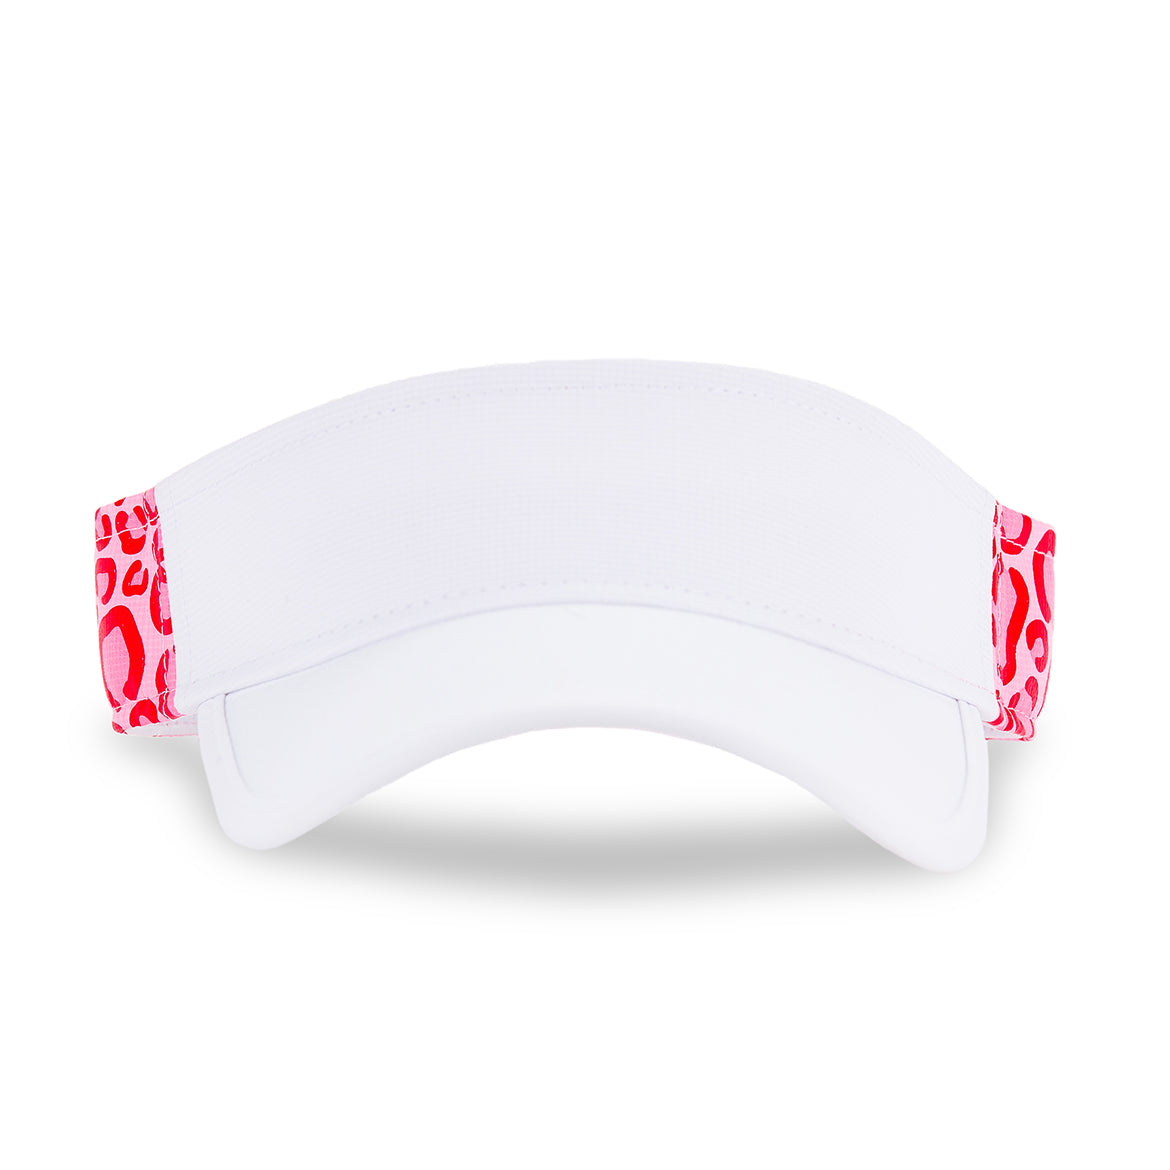 Front view of hot pink and red leopard pattern kids visor.